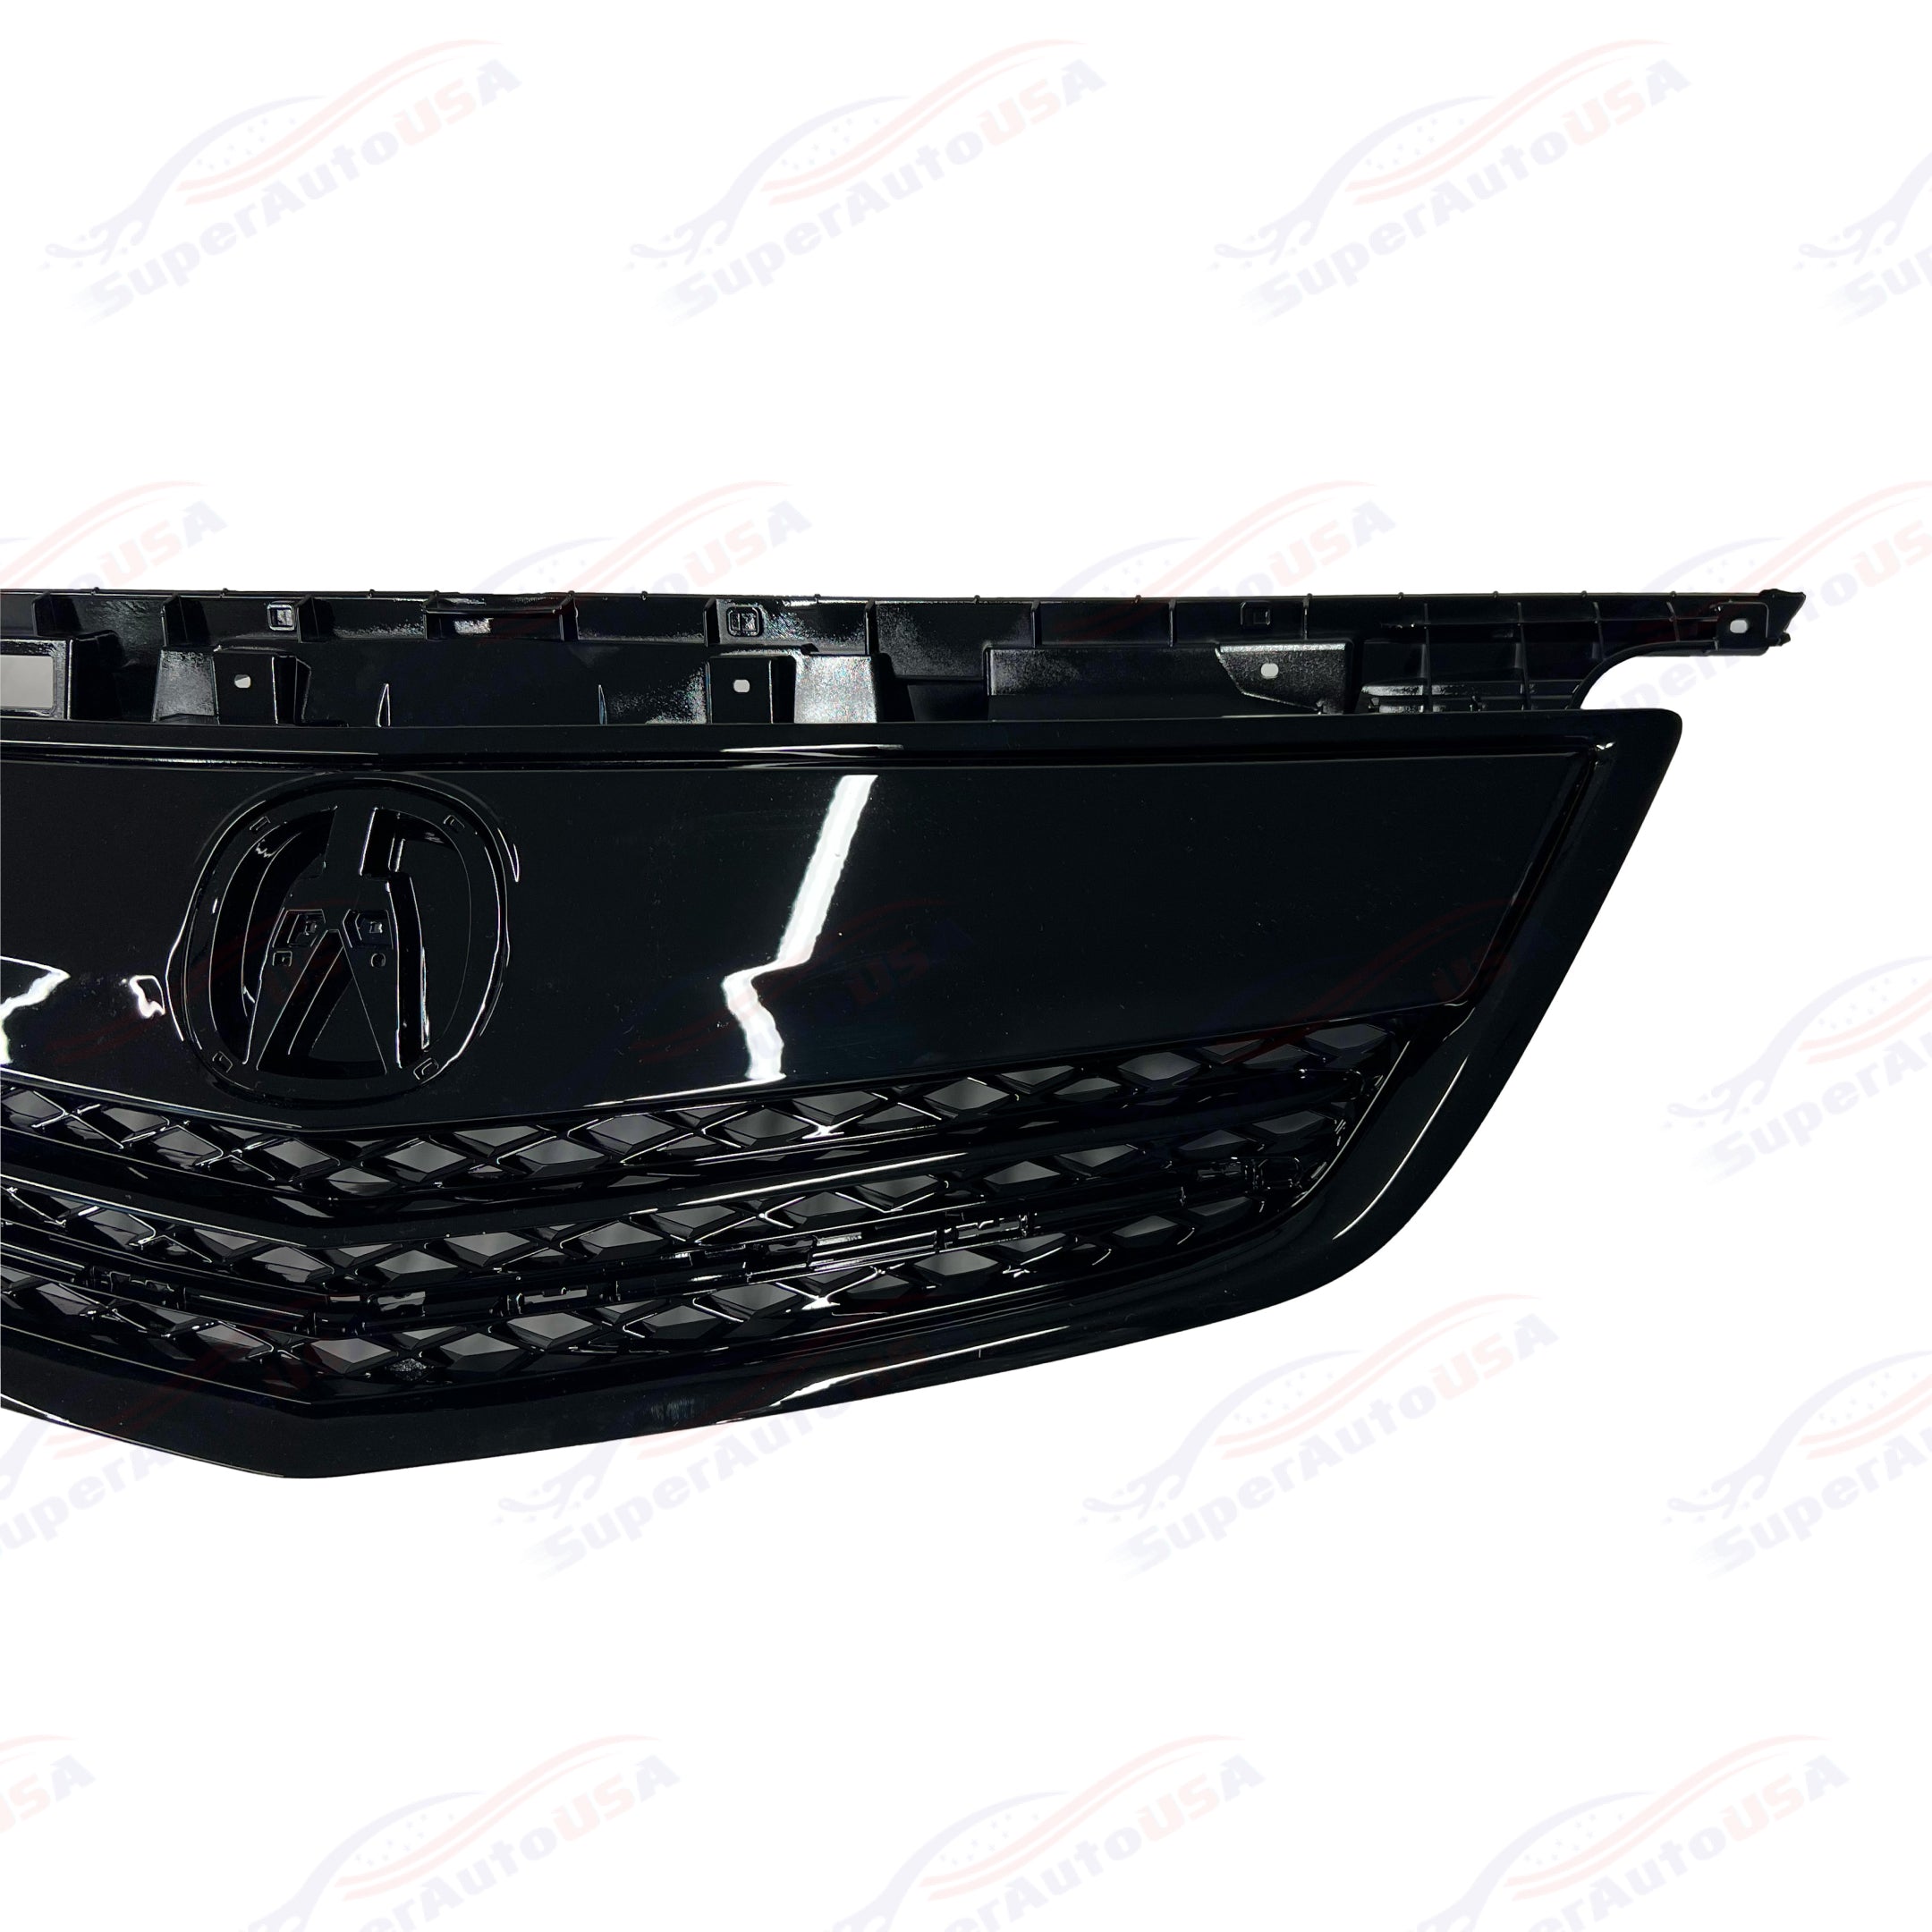 Fits Acura TL 2012-2014 Gloss Black Front Upper Grill/ Grille Assembly Whole Kit